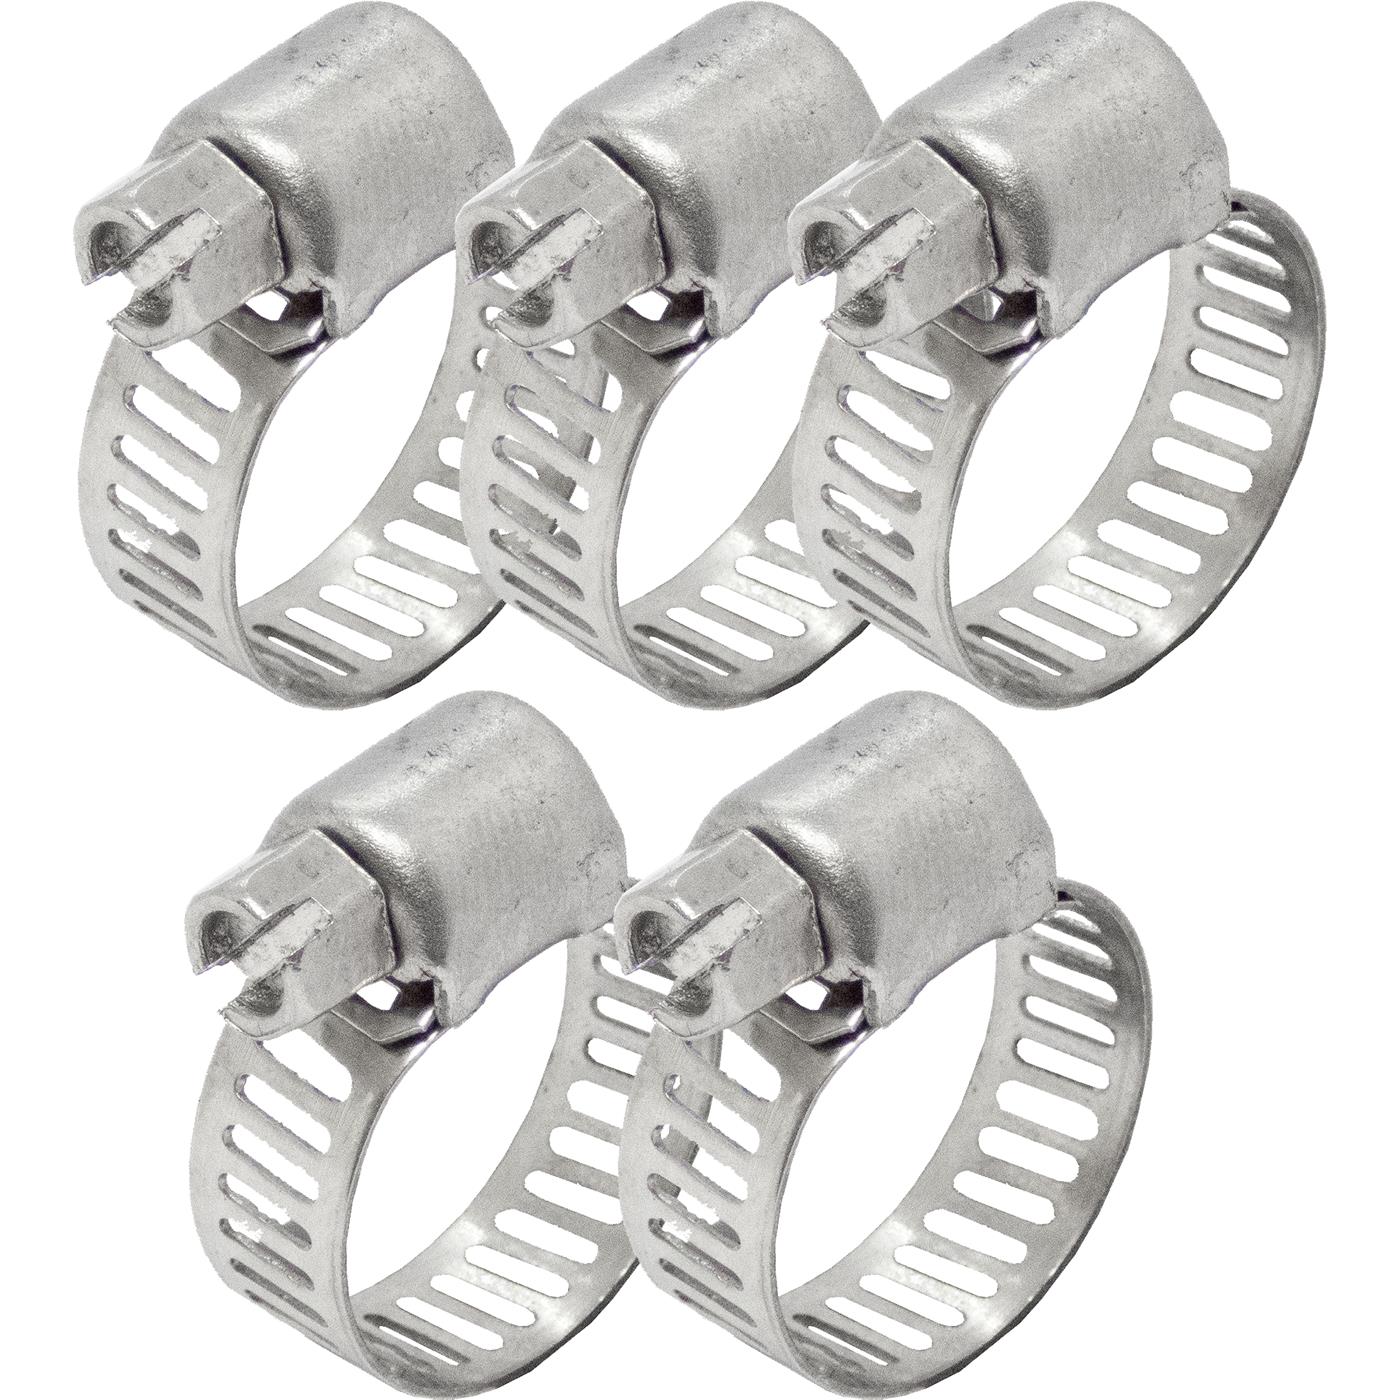 5x Hose clamp Stainless steel V4A 304 13-19mm Pipe clamp Hose clamp